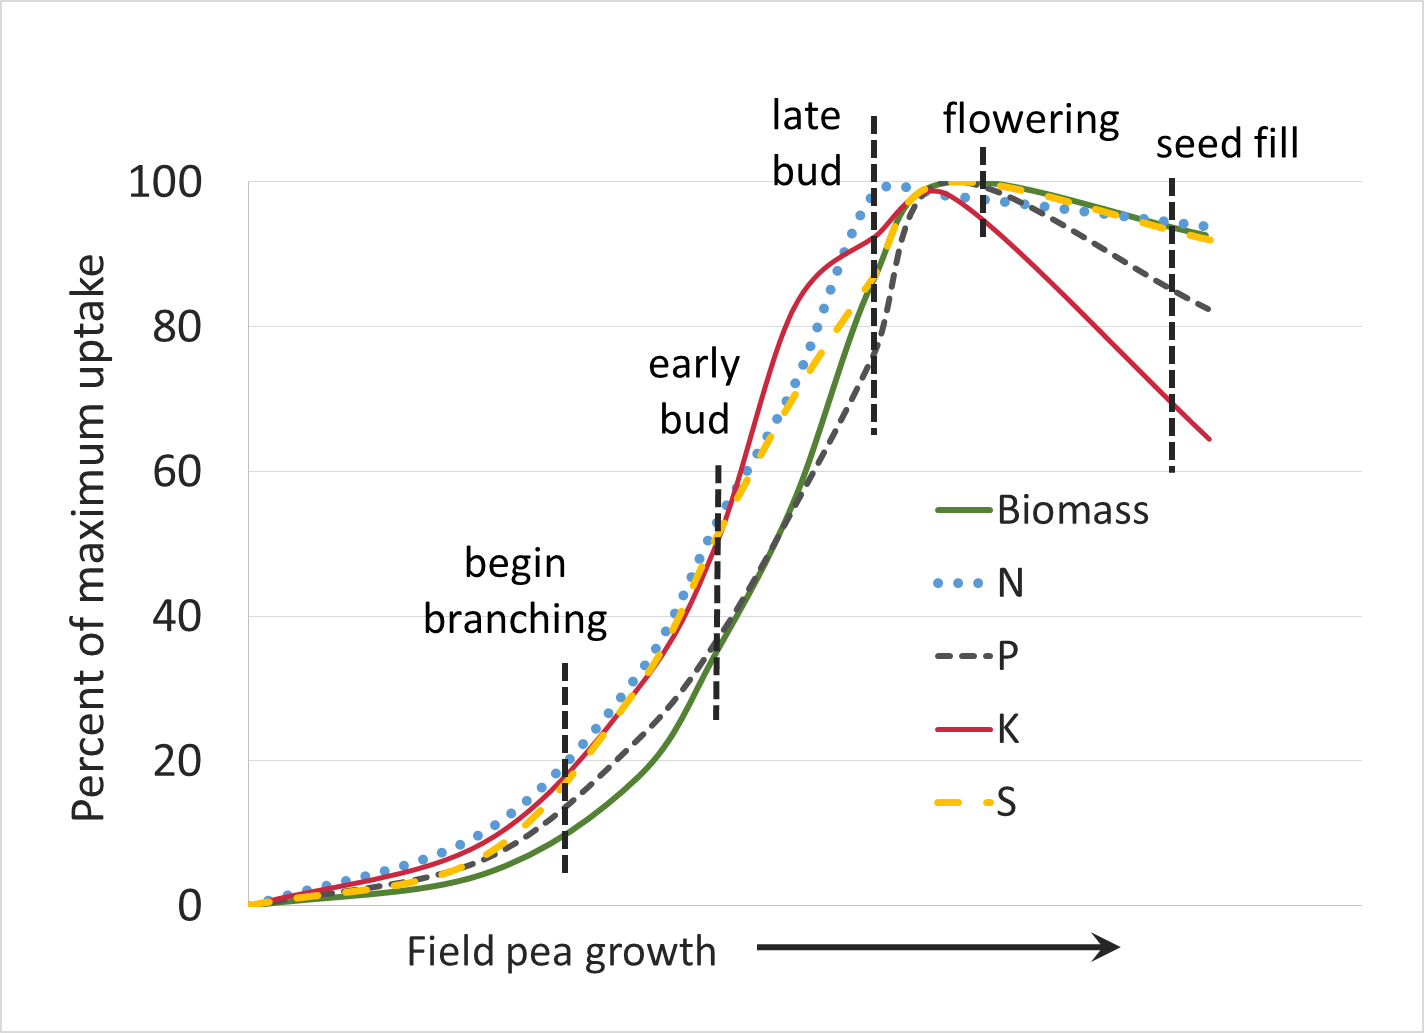 Pea: Uptake rates increase before reaching their maximum rates around early bud. Most nutrients reach 100% between late bud and flowering before decreasing slightly during seed fill.